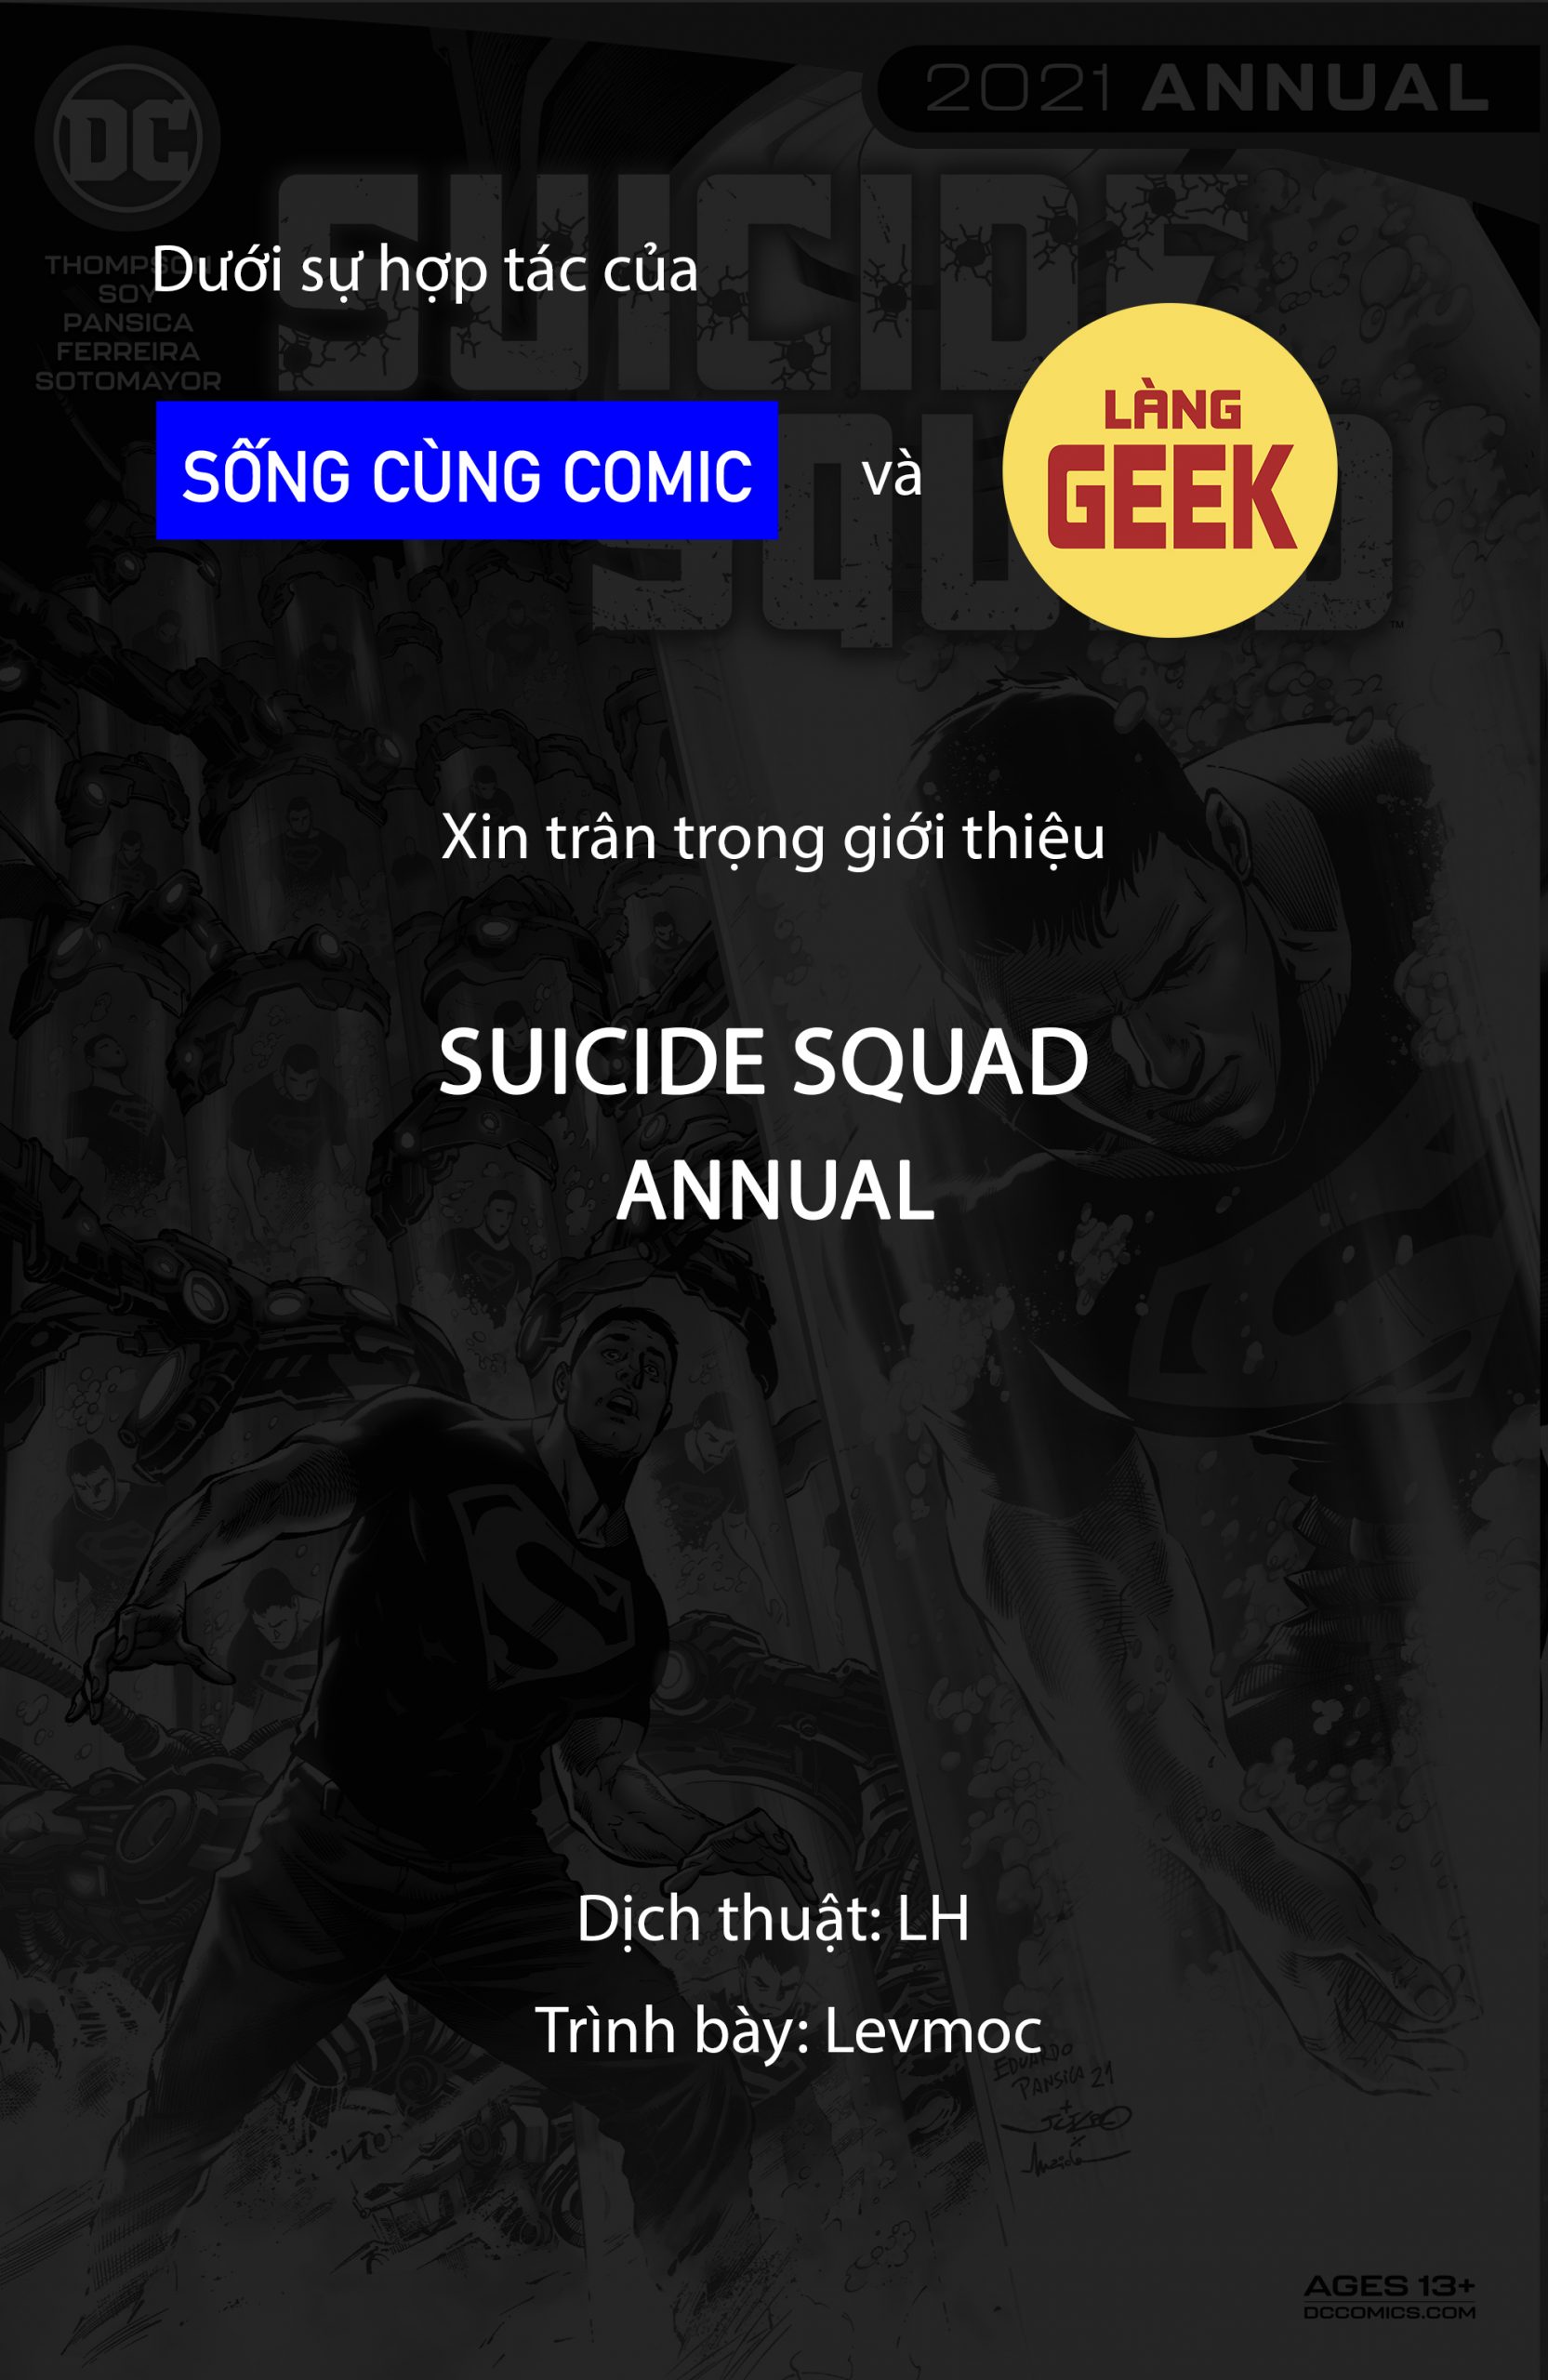 https://langgeek.net/wp-content/uploads/2021/11/Suicide-Squad-2021-Annual-2021-001-001-scaled.jpg